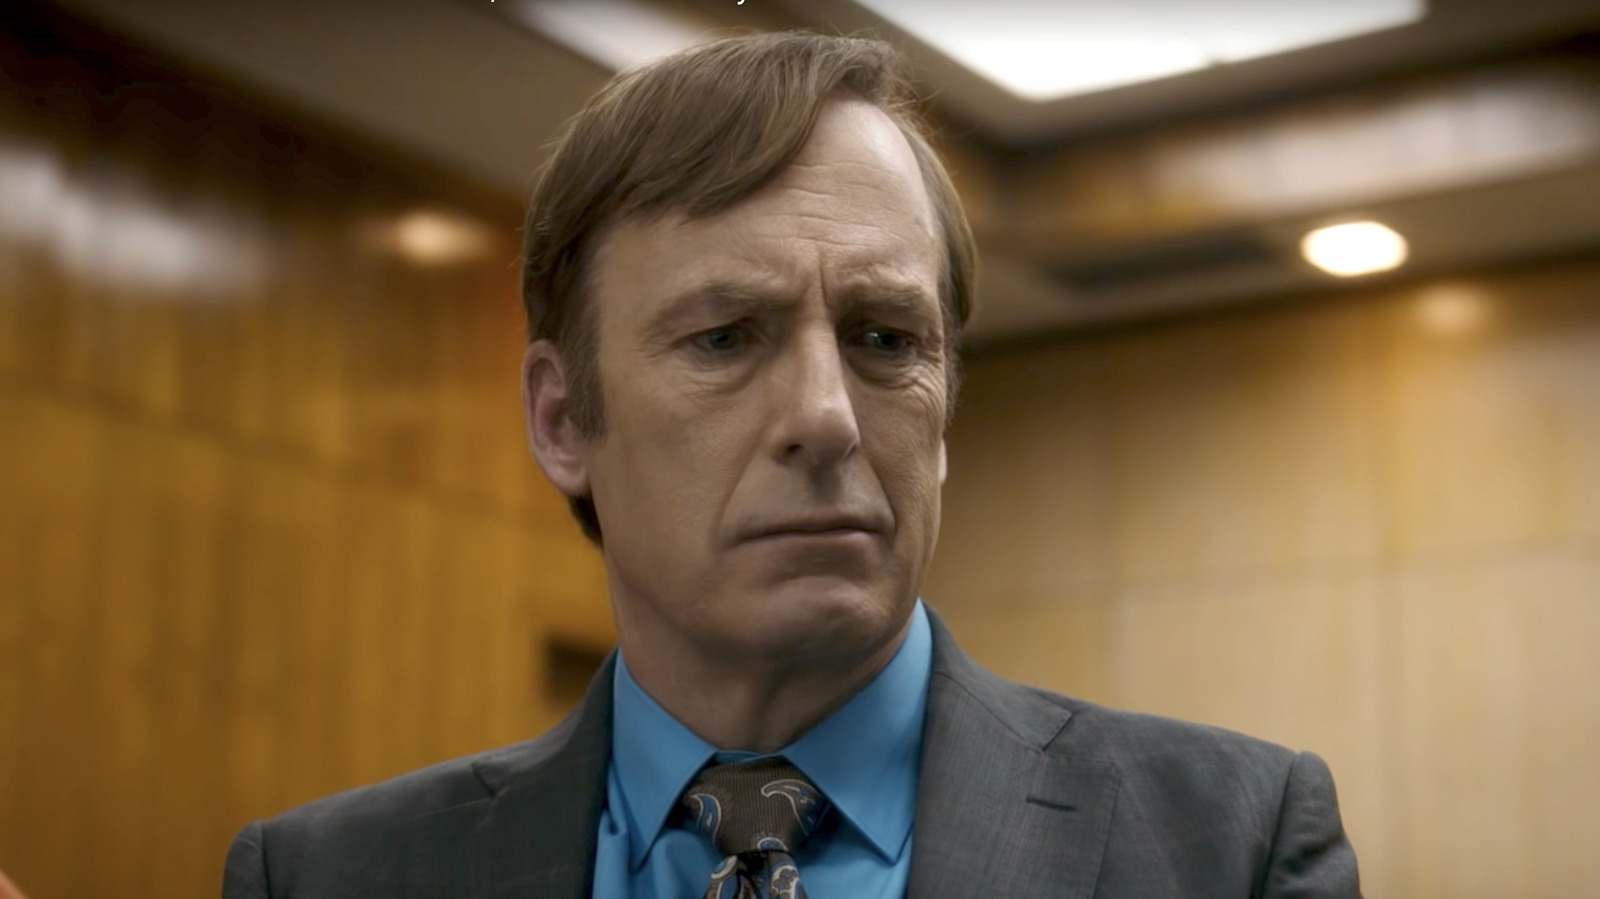 One Scene Completely Changed How The Writers Approached Better Call Saul